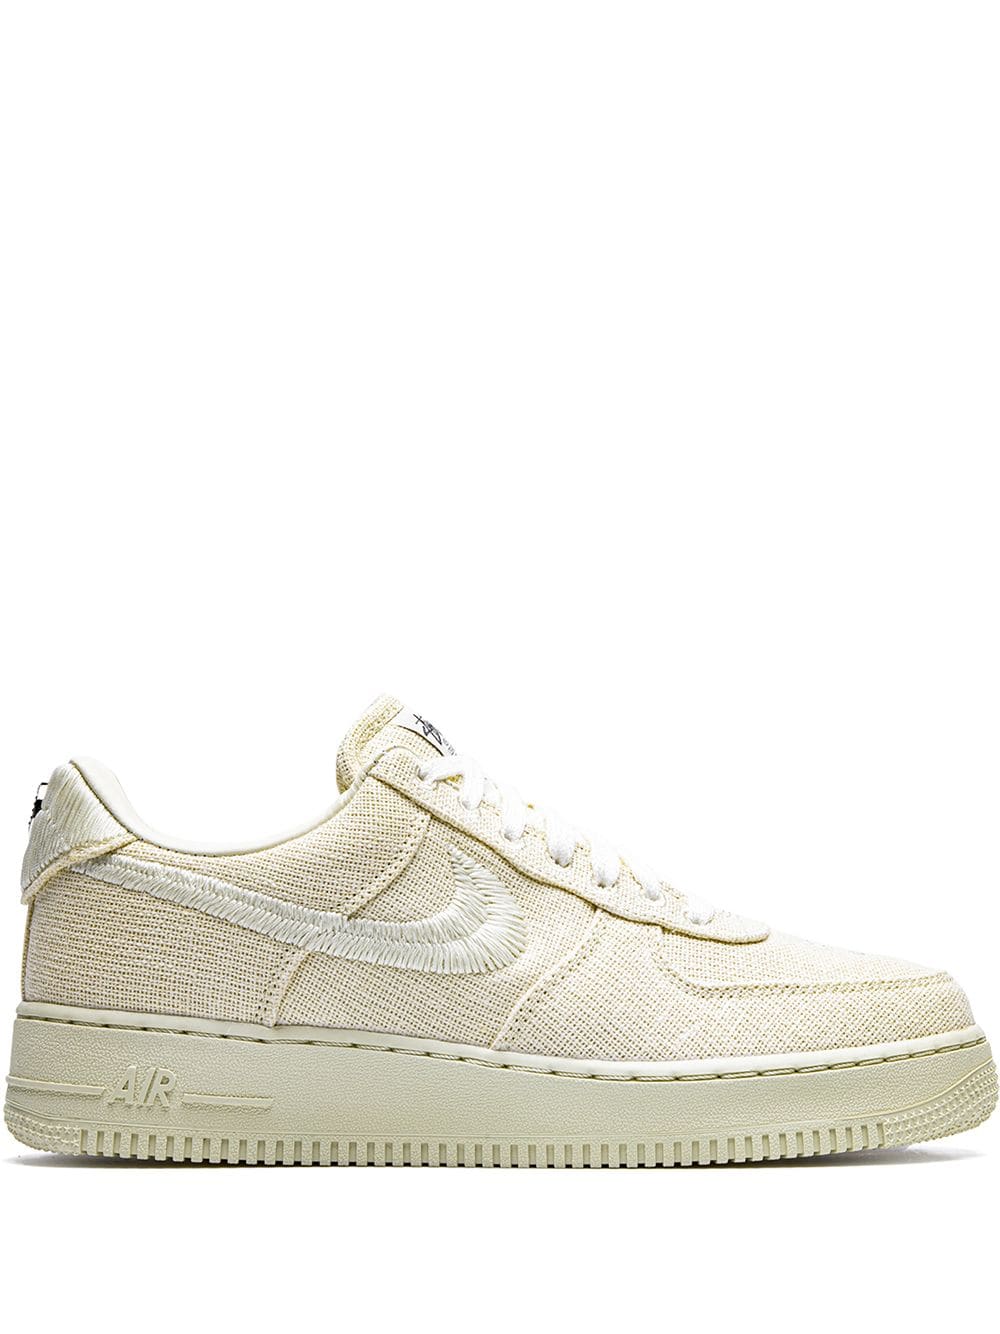 Nike x Stussy Air Force 1 Low "Fossil" sneakers - Neutrals von Nike